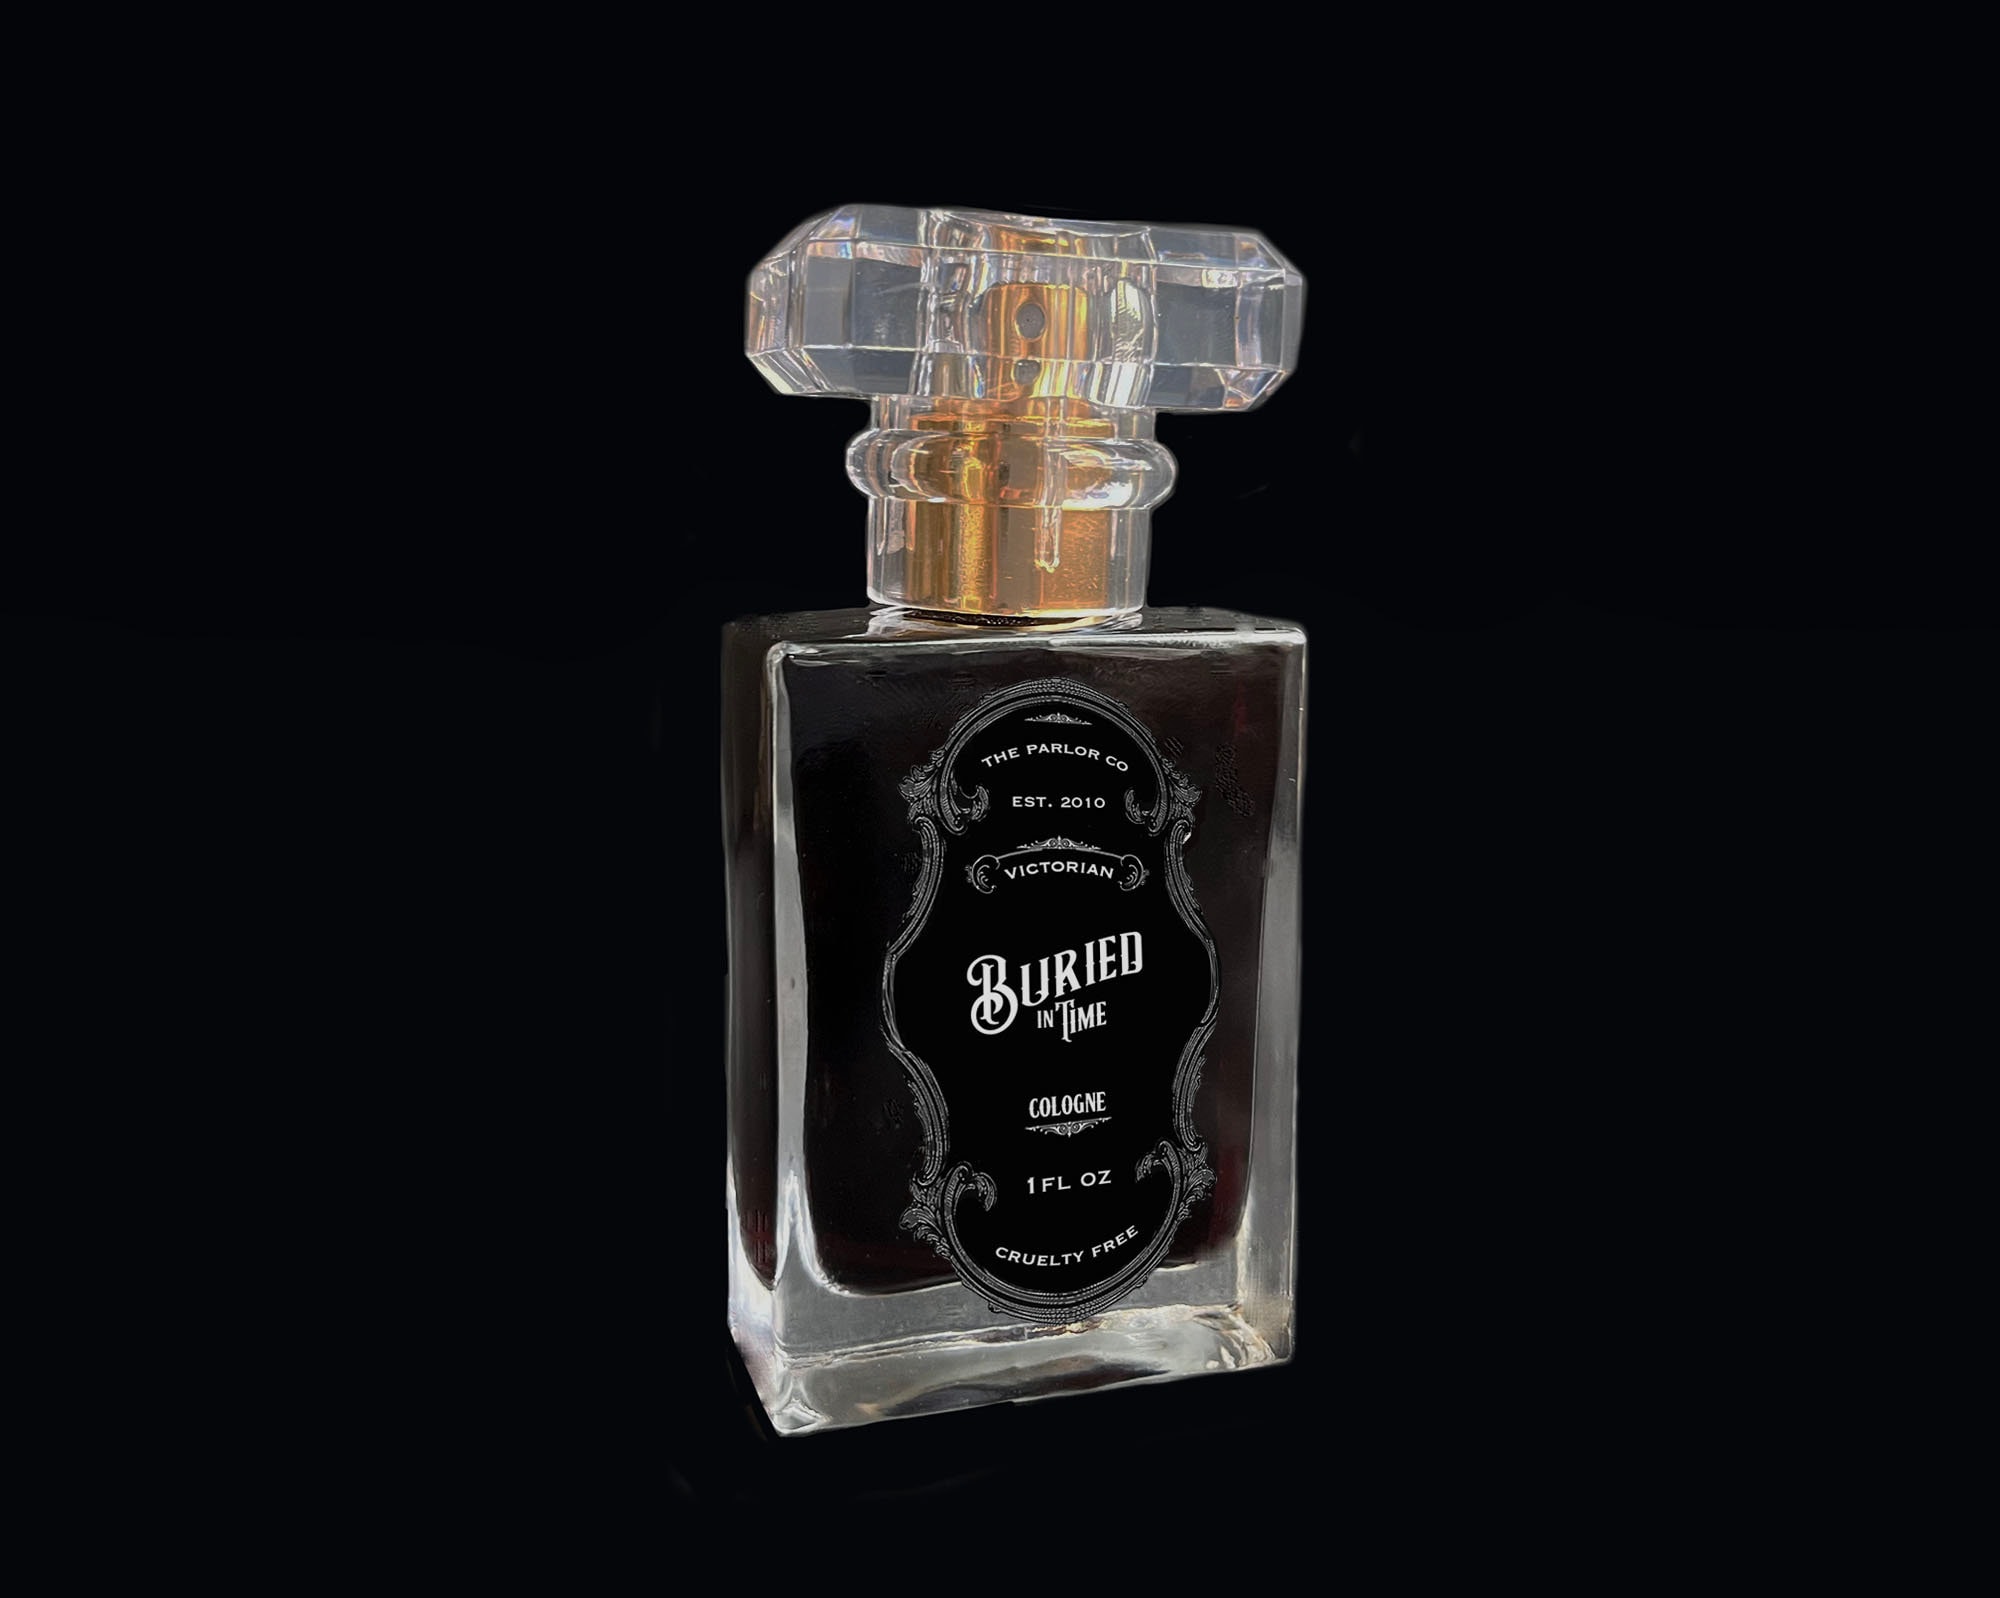 EGYPTIAN MUSK SUPERIOR Perfume Oil by Sukran 15ml Lasts All Day